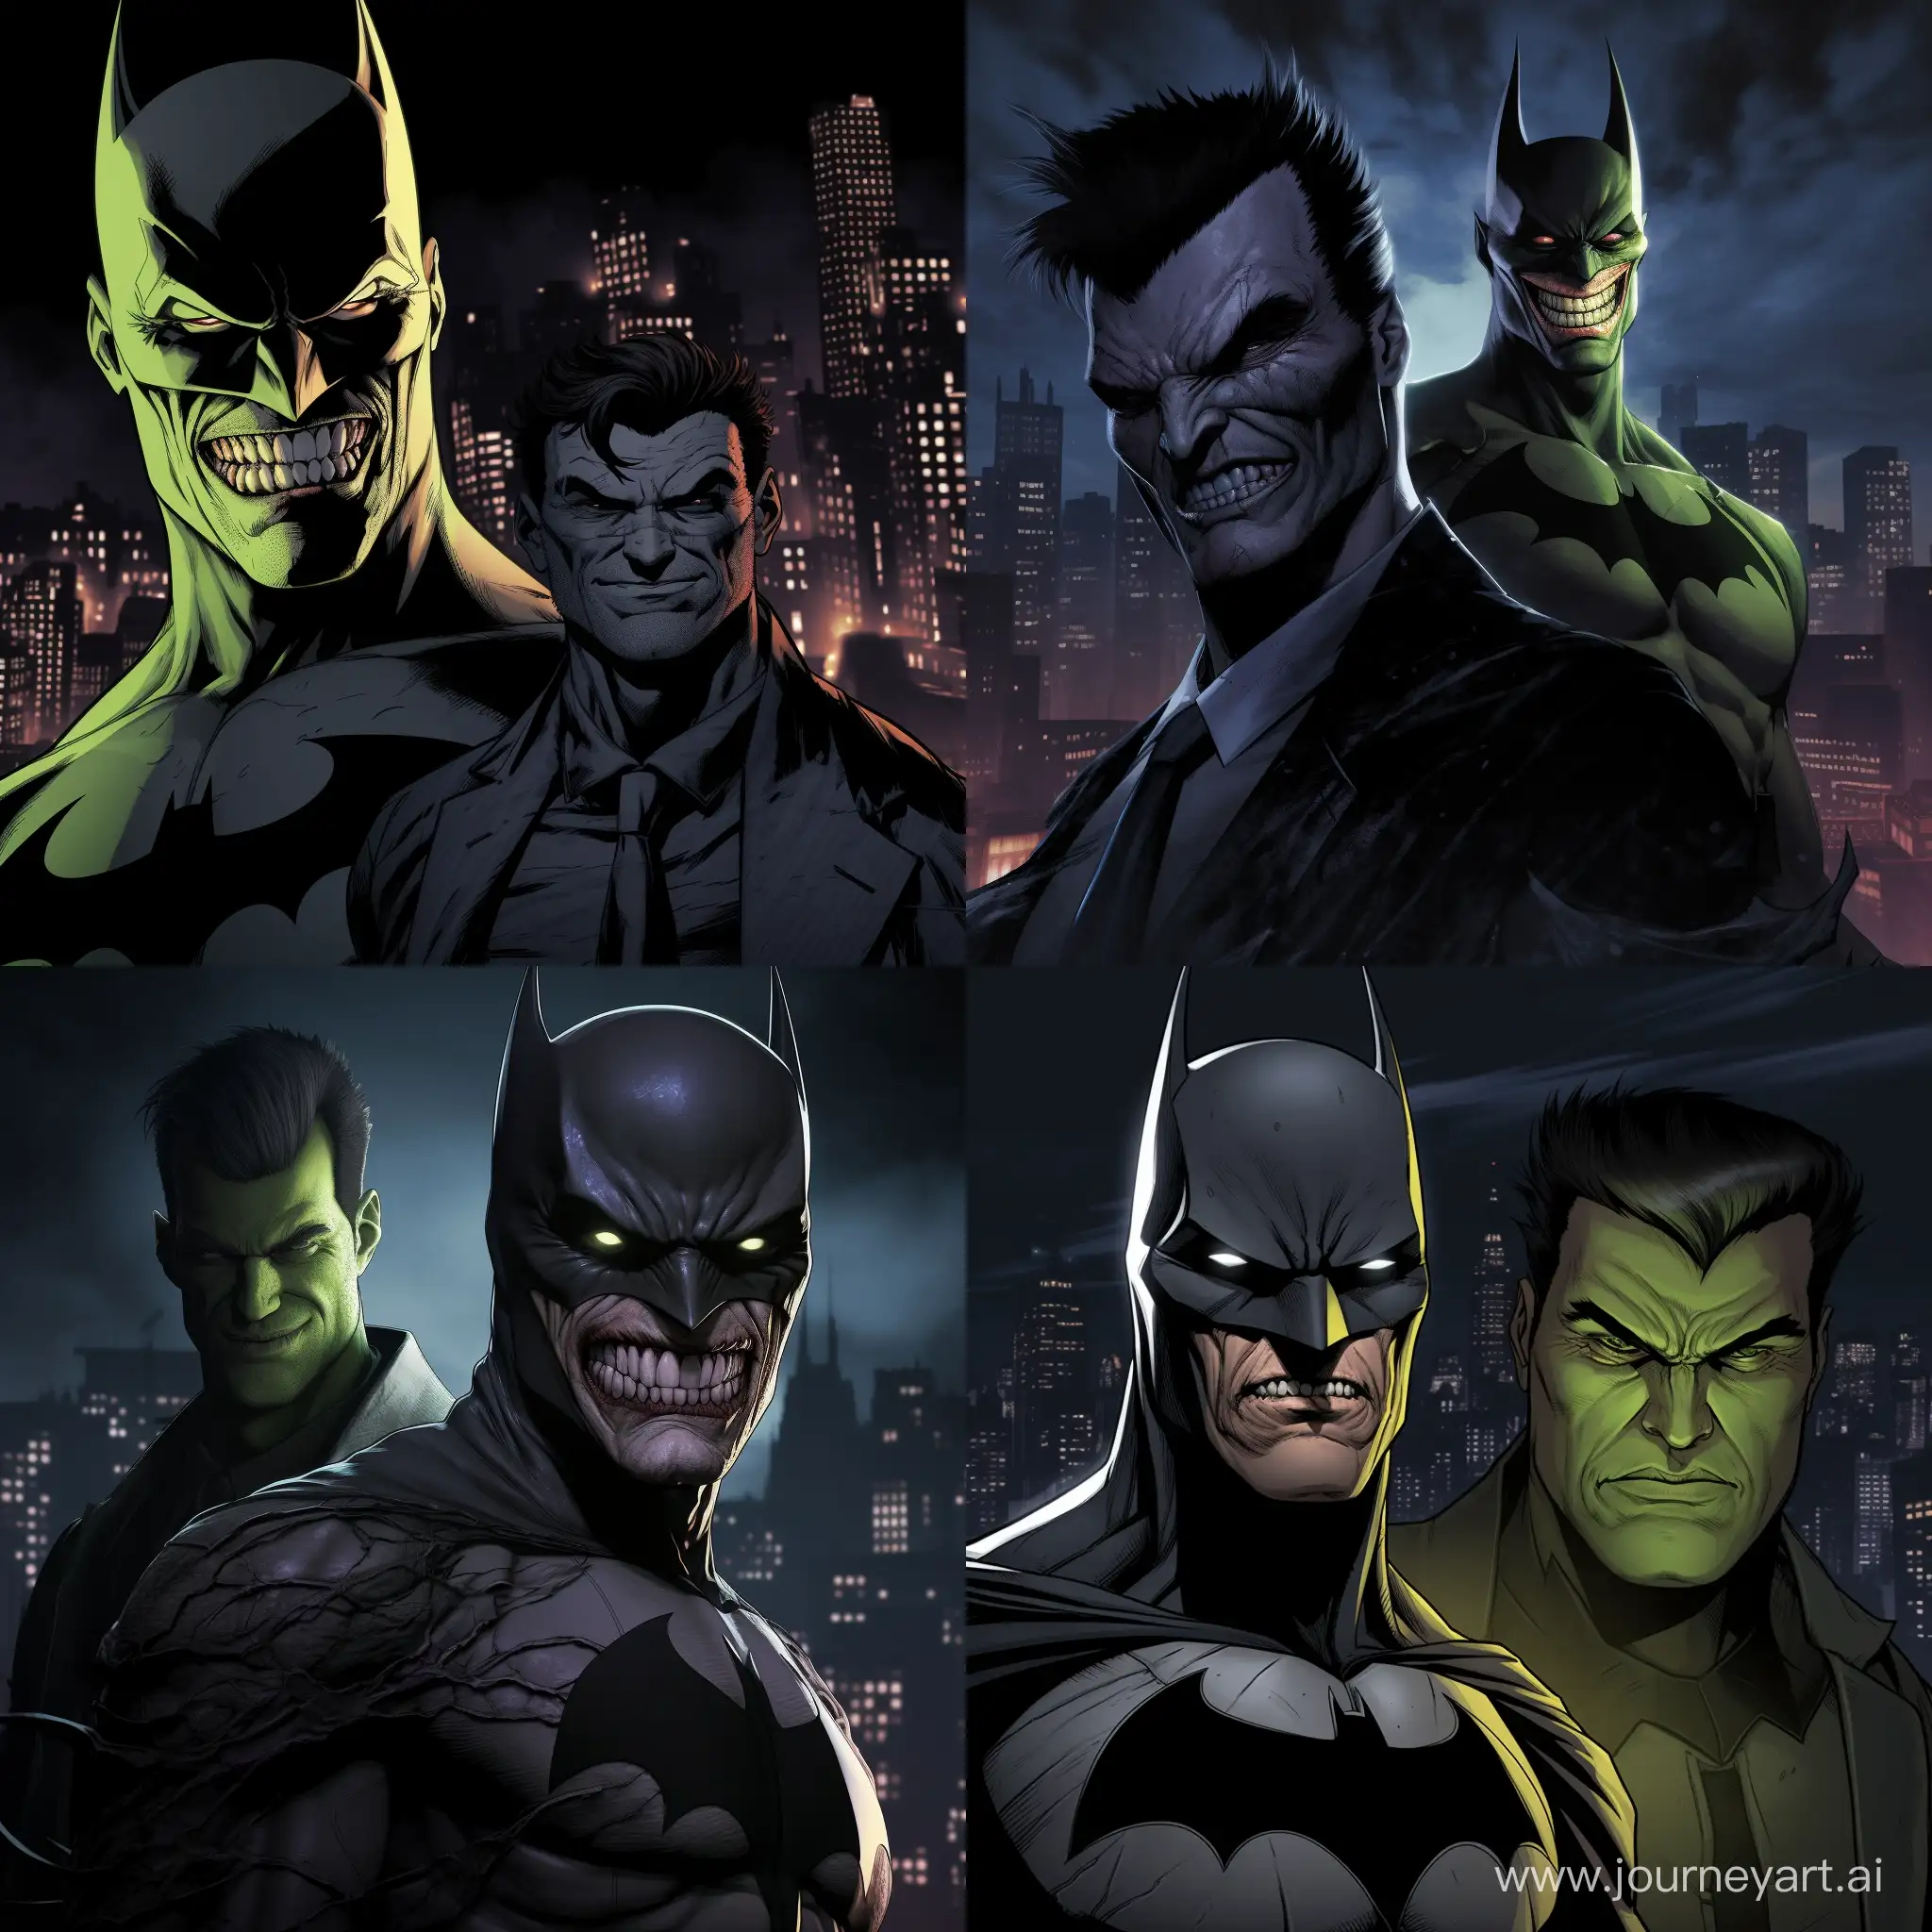 Batman and the Joker, depicted in a dark, moody cityscape at night. Batman is in his iconic suit with a cape, looking imposing and determined. The Joker, with his characteristic green hair, pale face, and sinister grin, faces Batman. Both are standing close, almost face to face, creating a tense and dramatic atmosphere. The background is a shadowy Gotham City with towering buildings, dimly lit streets, and a cloudy, moonlit sky. Emphasize the contrast between Batman's dark figure and the Joker's colorful appearance. The mood is tense, suspenseful, and dark.